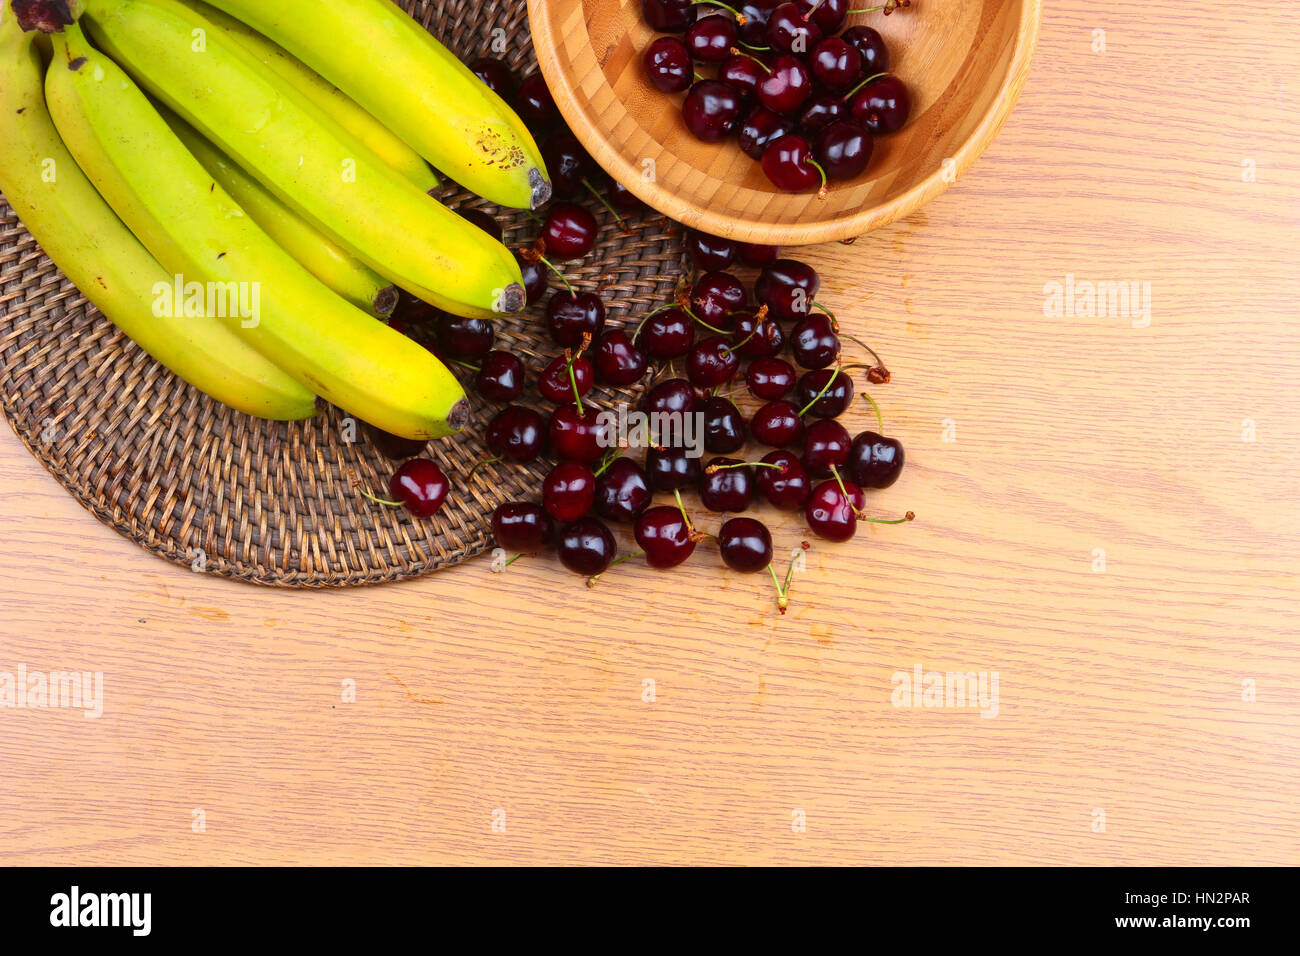 A Wooden Bowl of Mixed Fruits on a Wooden Background, Banana, Cherries, Peaches Stock Photo